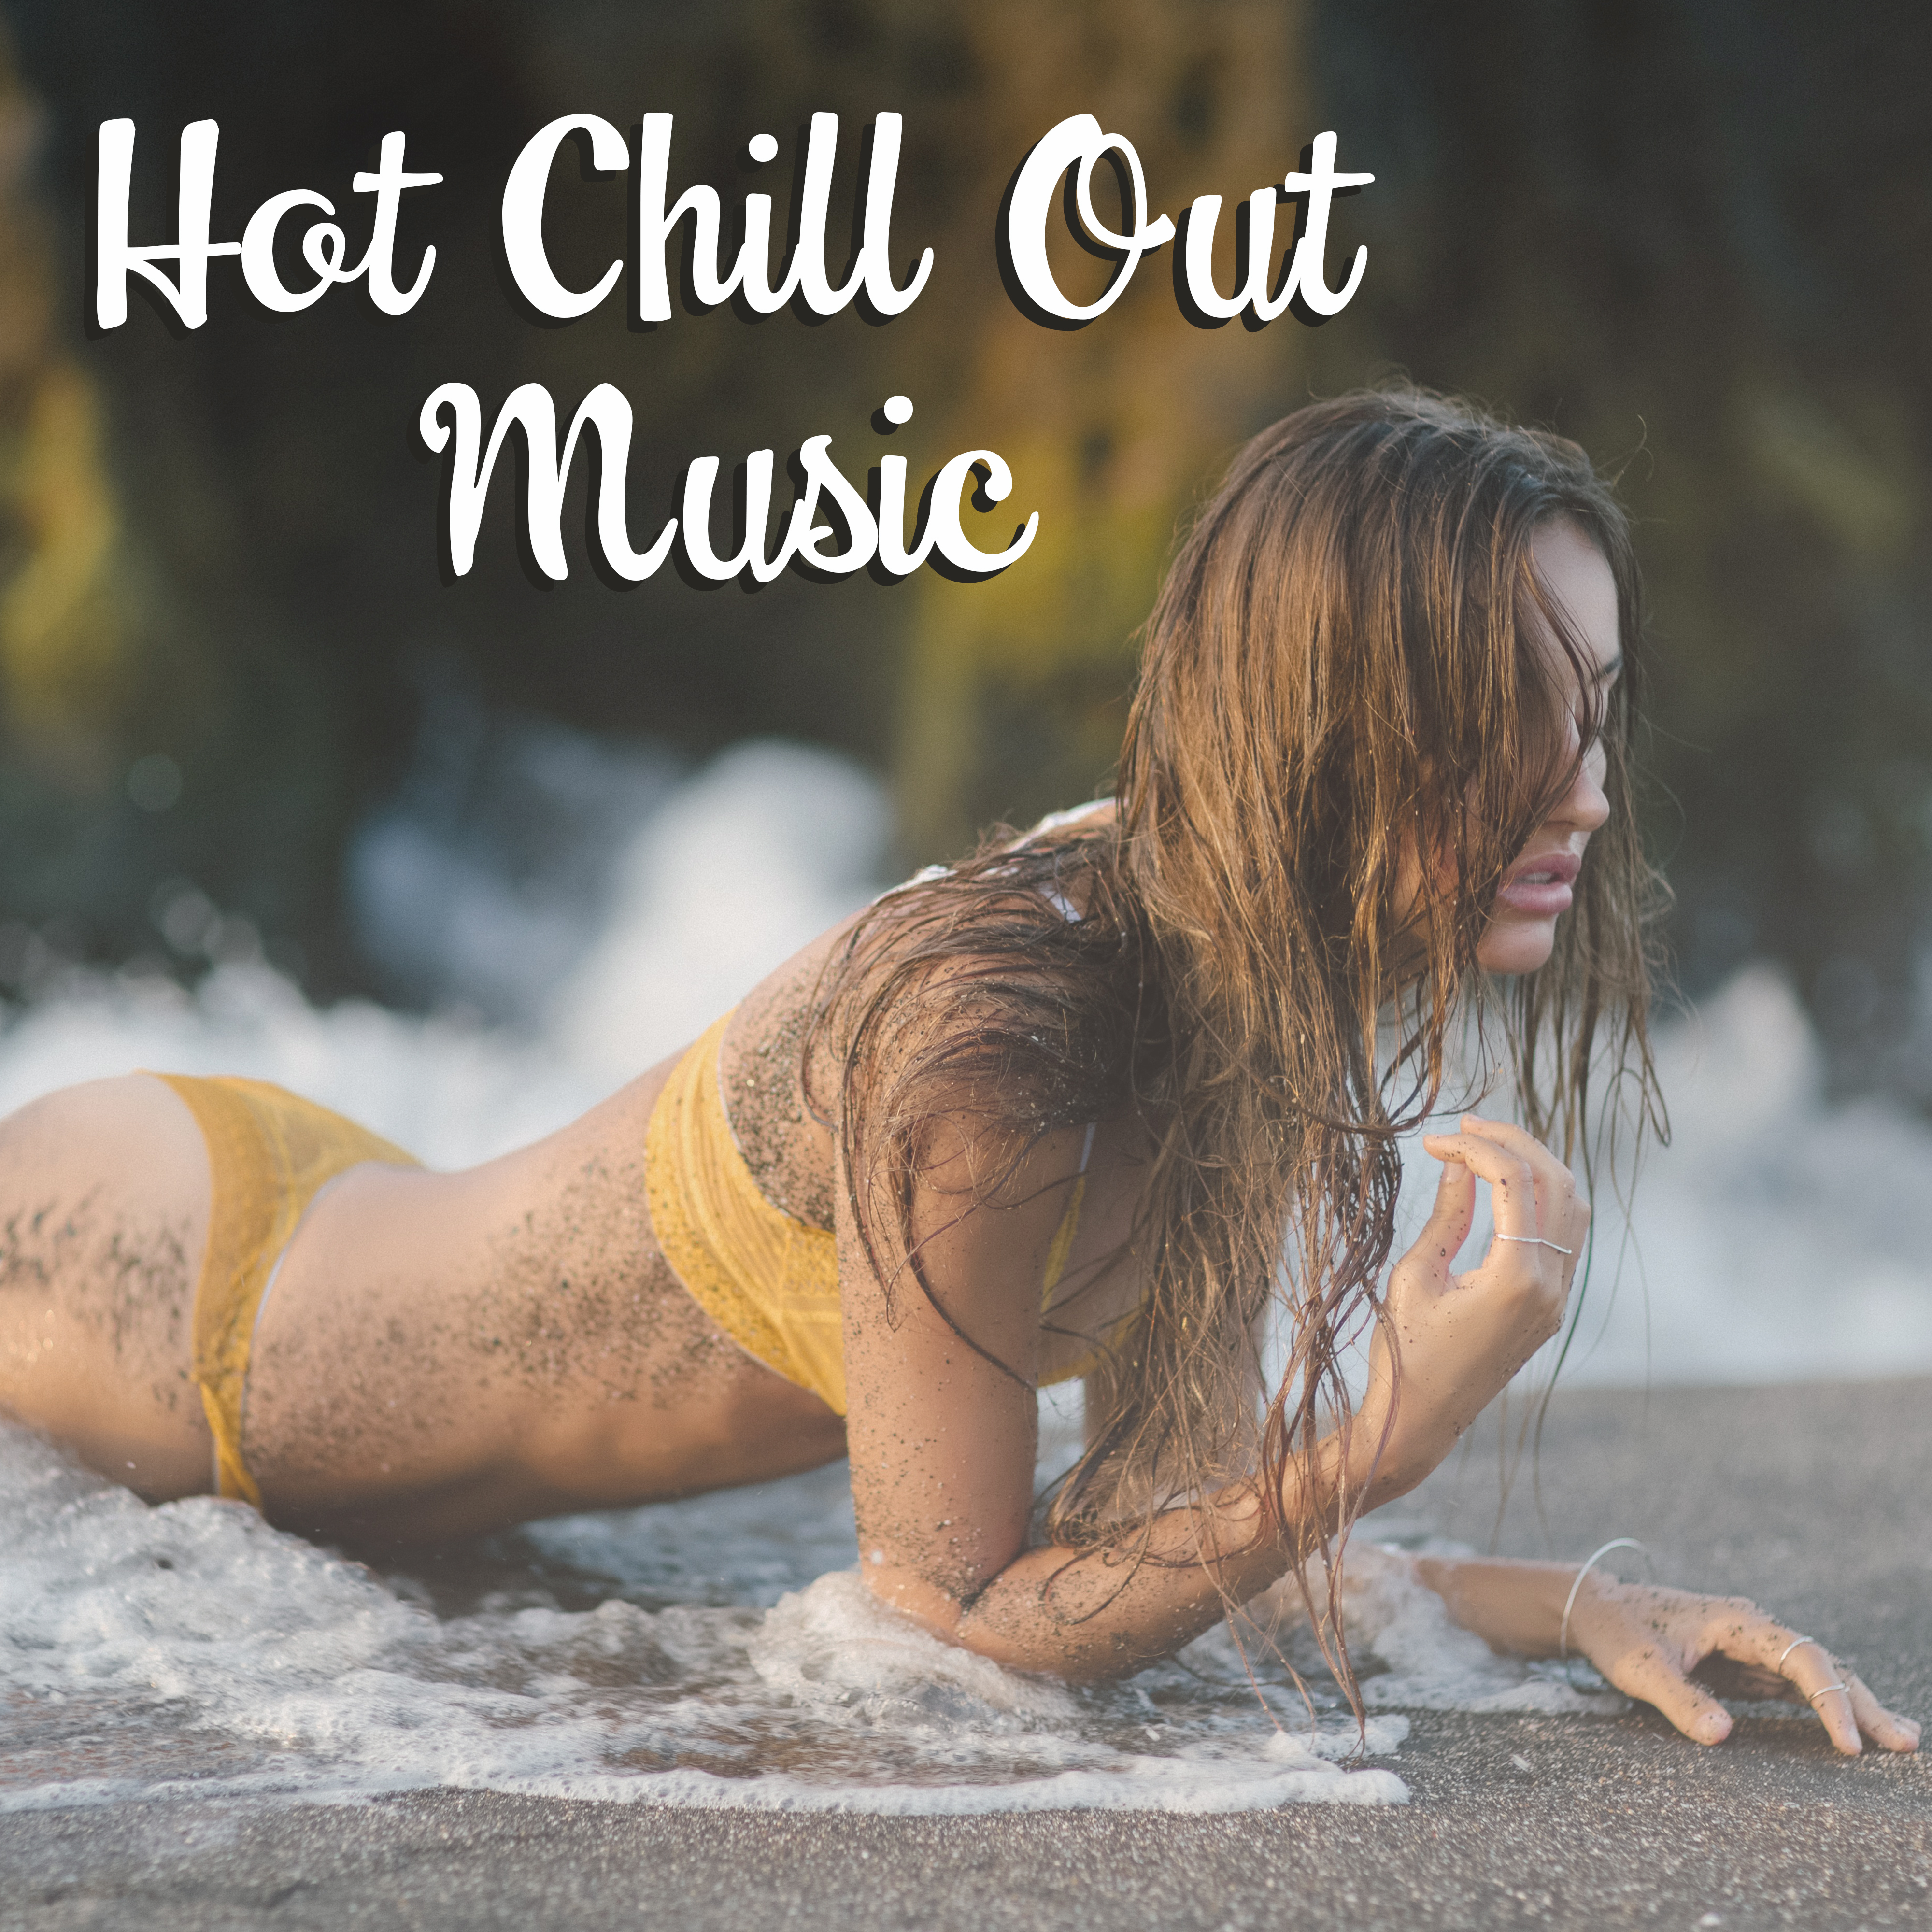 Hot Chill Out Music  Erotic Dance, Summer on Ibiza, Beach Party, Hot Vibes